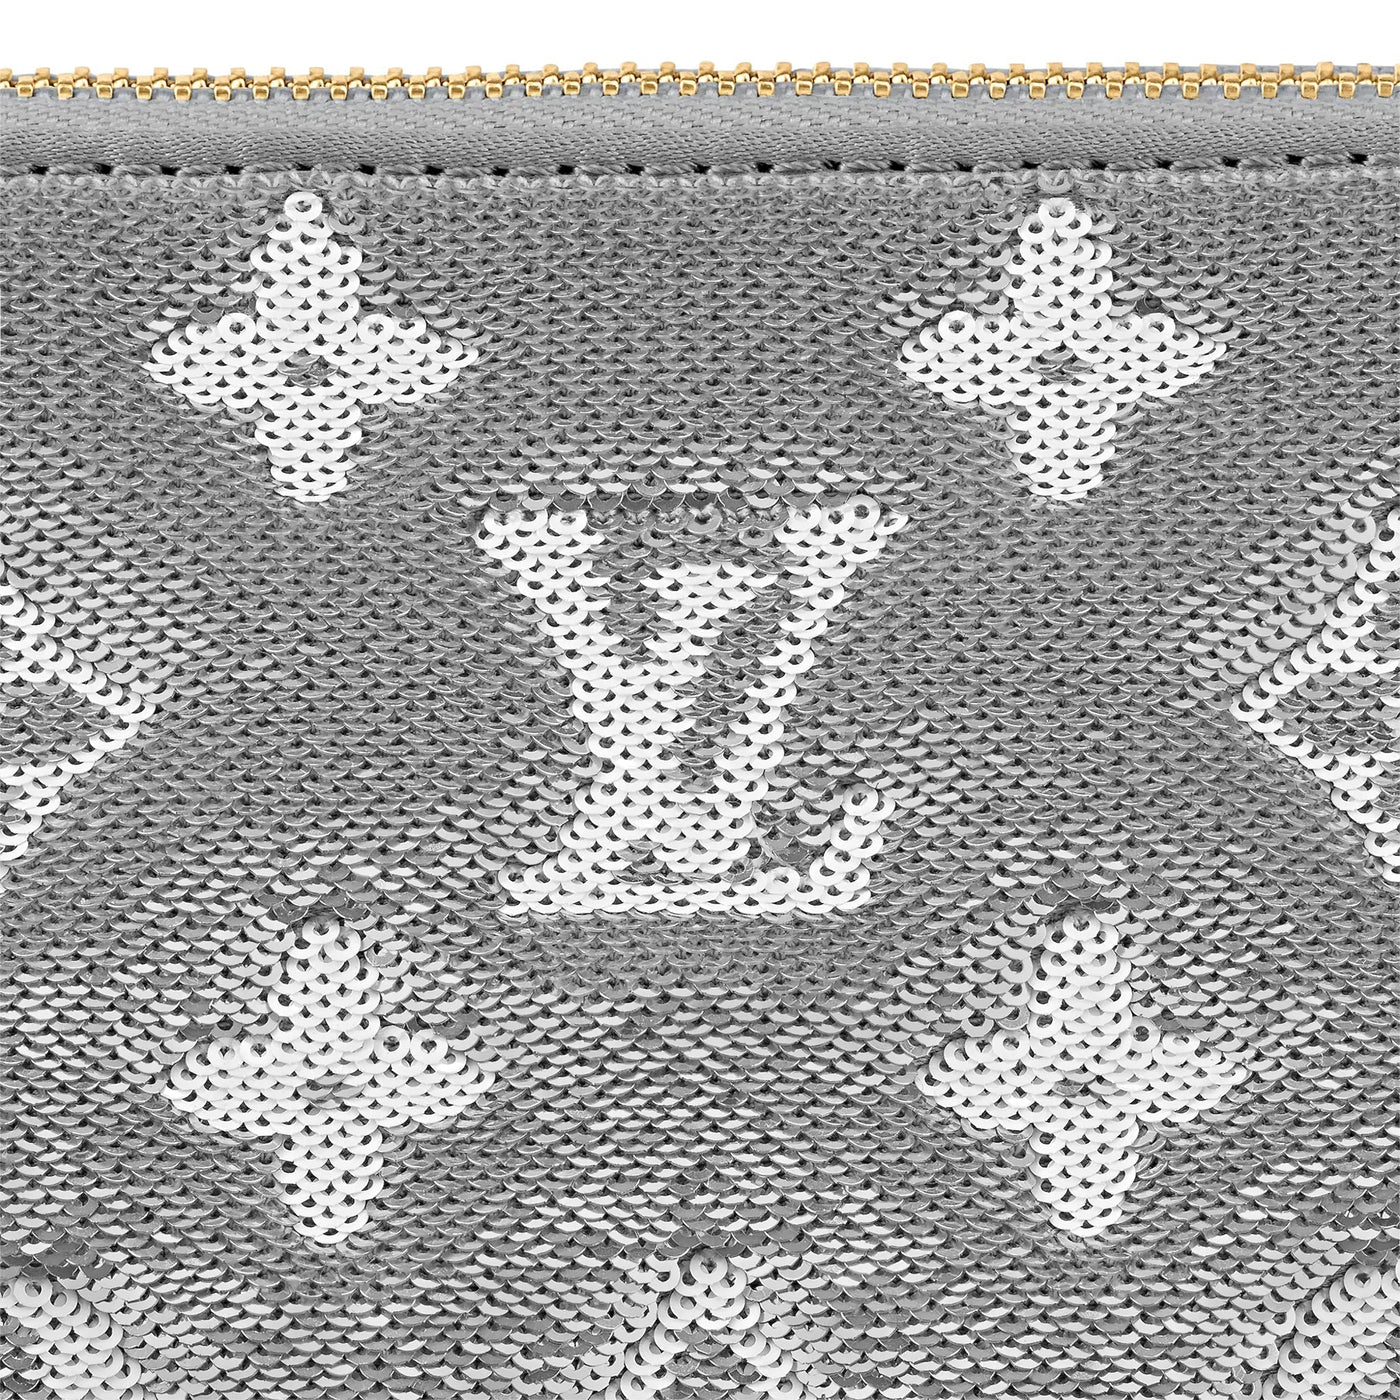 LOUIS VUITTON Satin Sequin Embroidered Monogram Coussin BB Silver 1241050